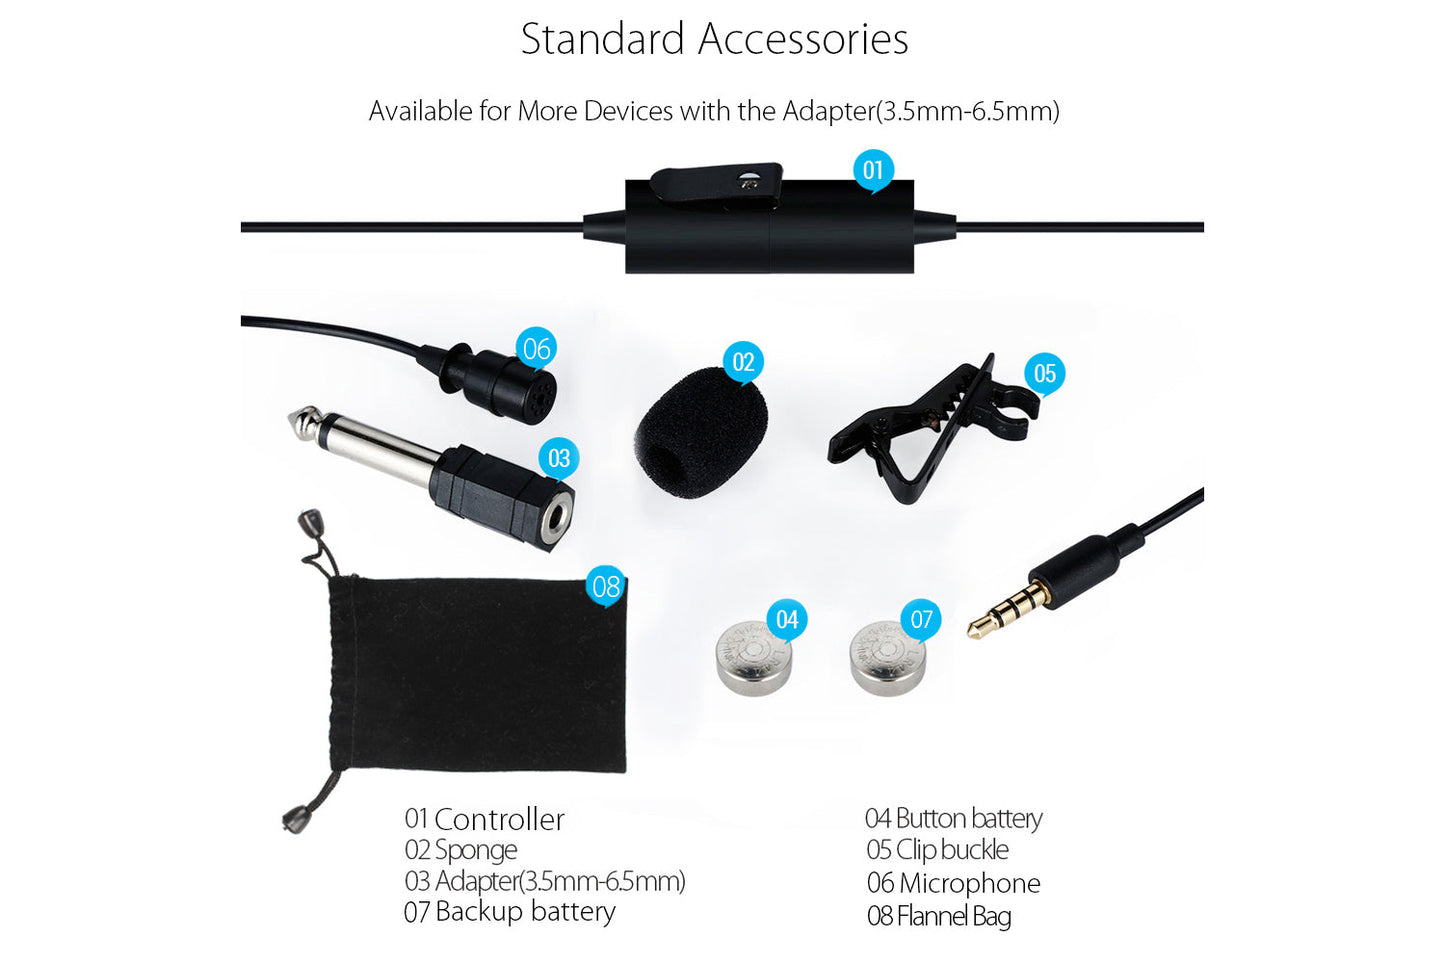 ProSound Electret Condenser Omnidirectional 3.5mm Lavalier Microphone with 6m Cable - maplin.co.uk